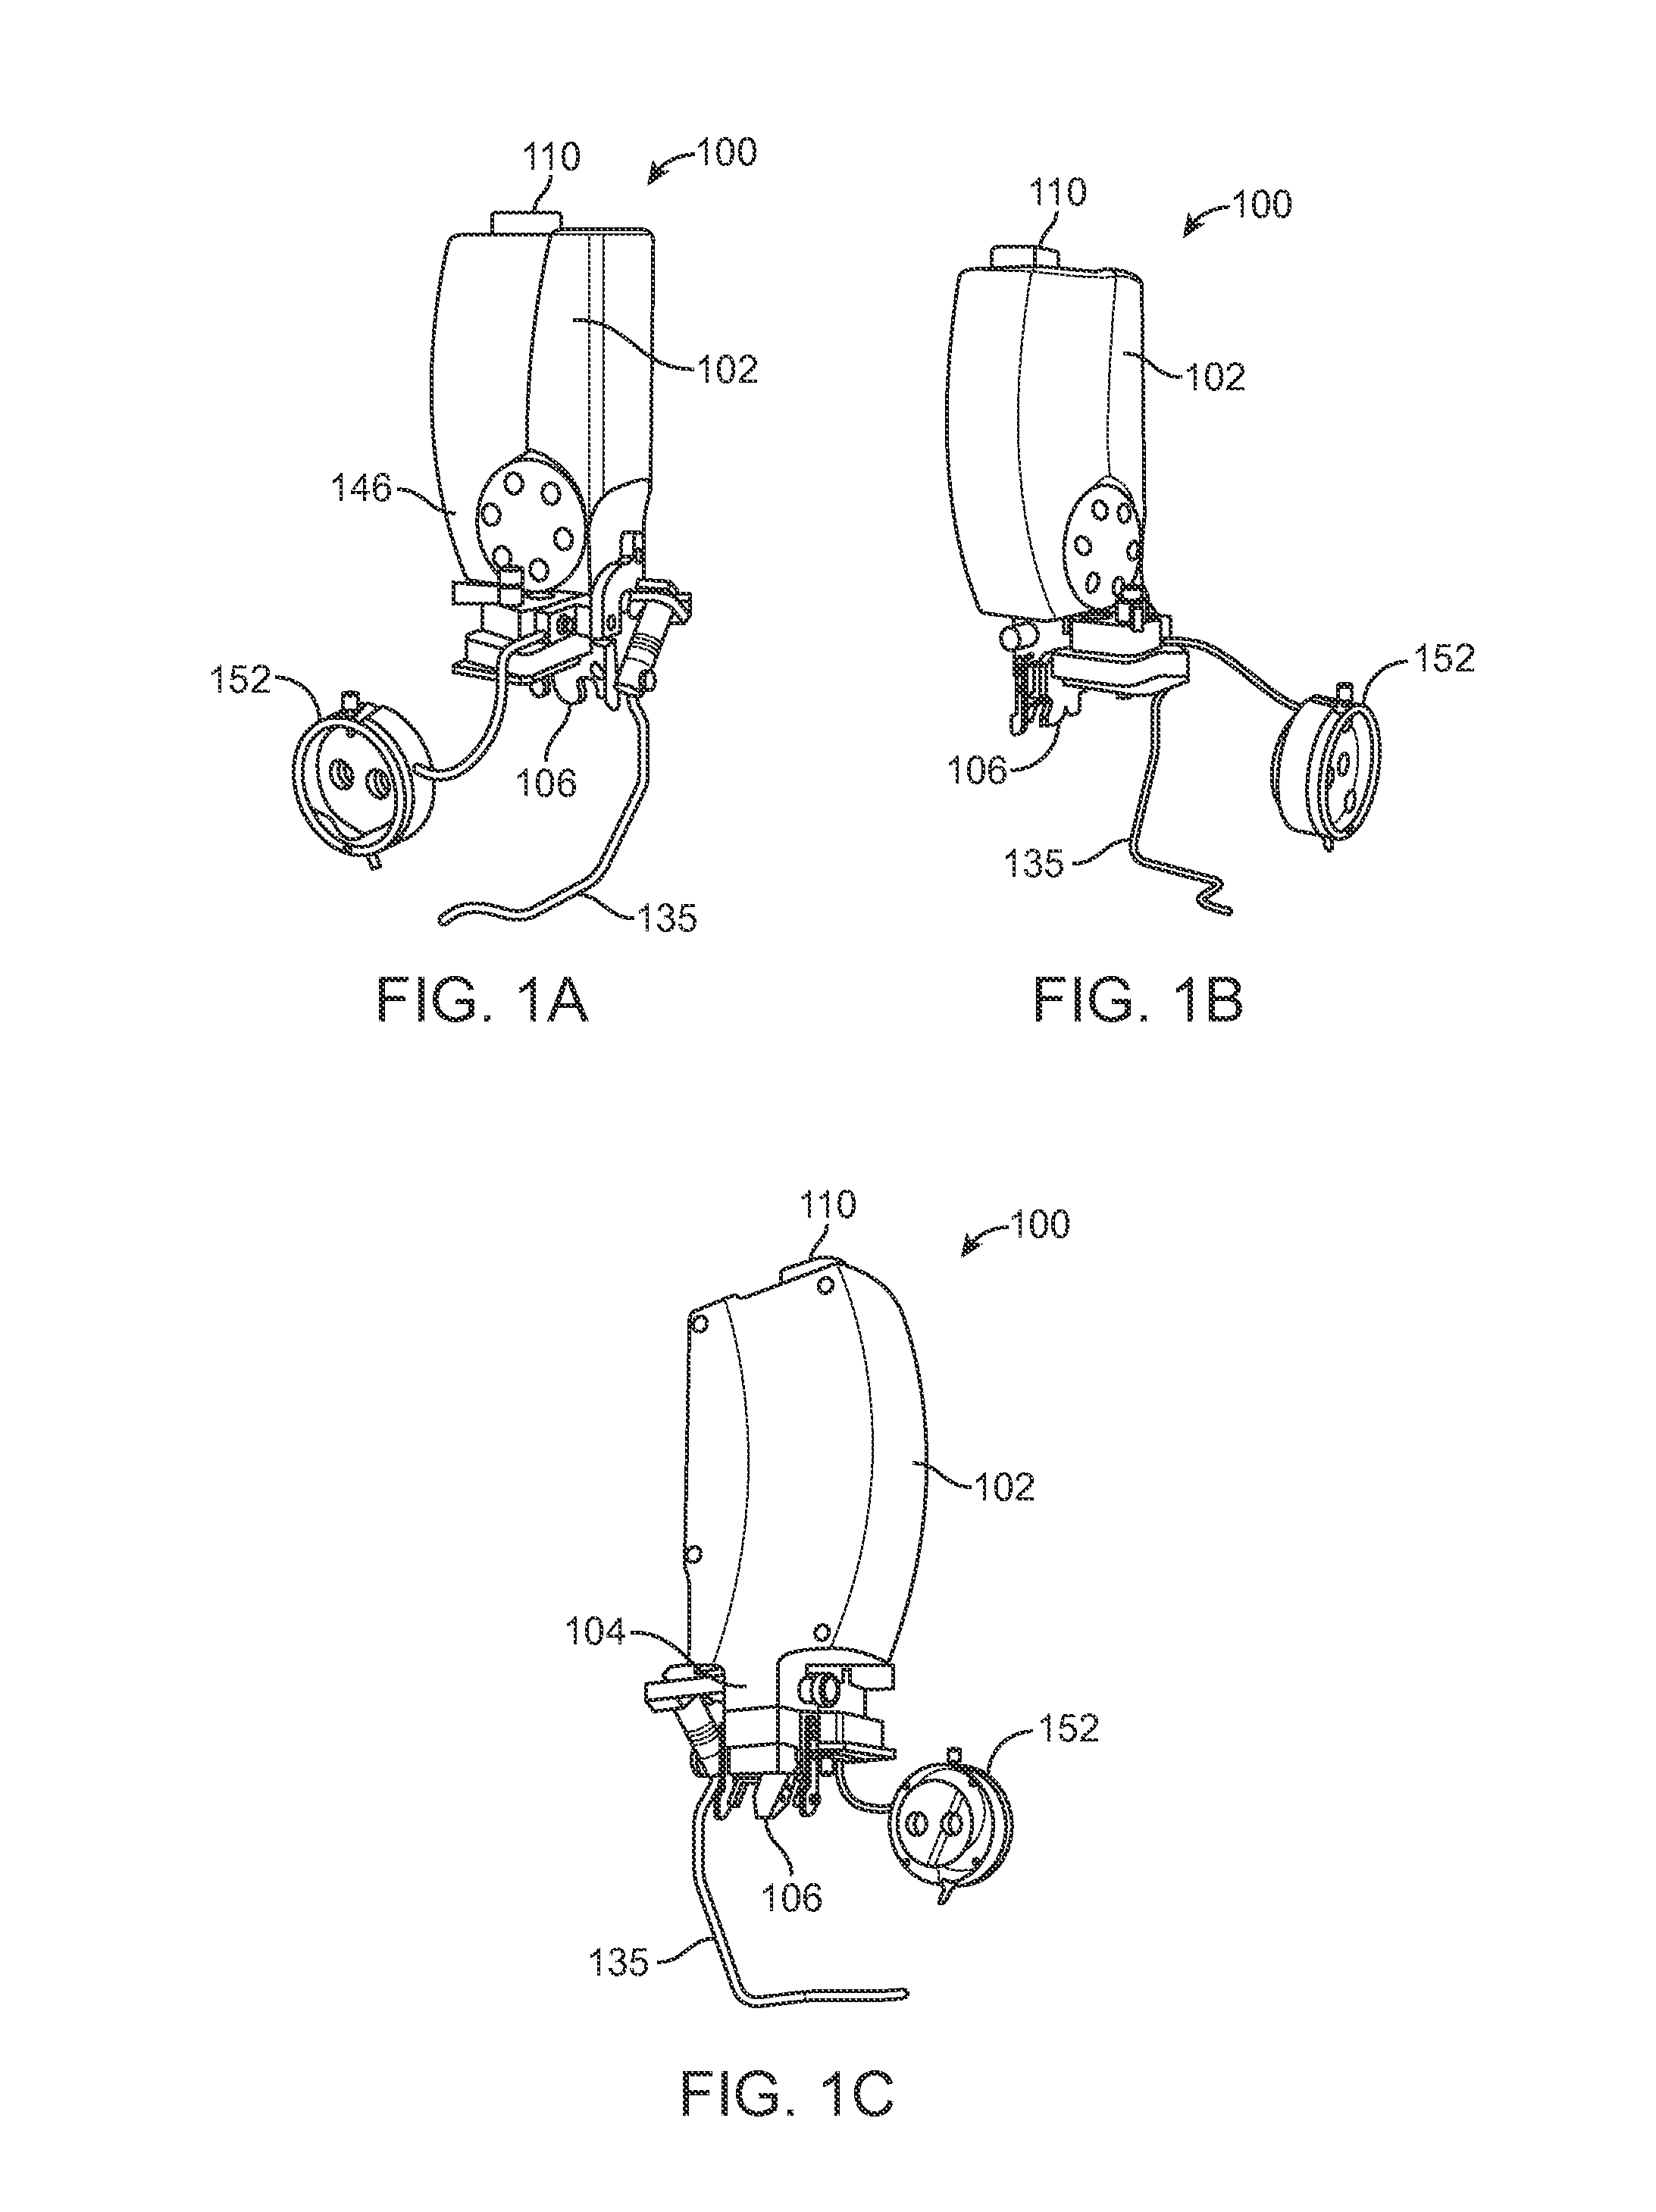 Grid pattern laser treatment and methods